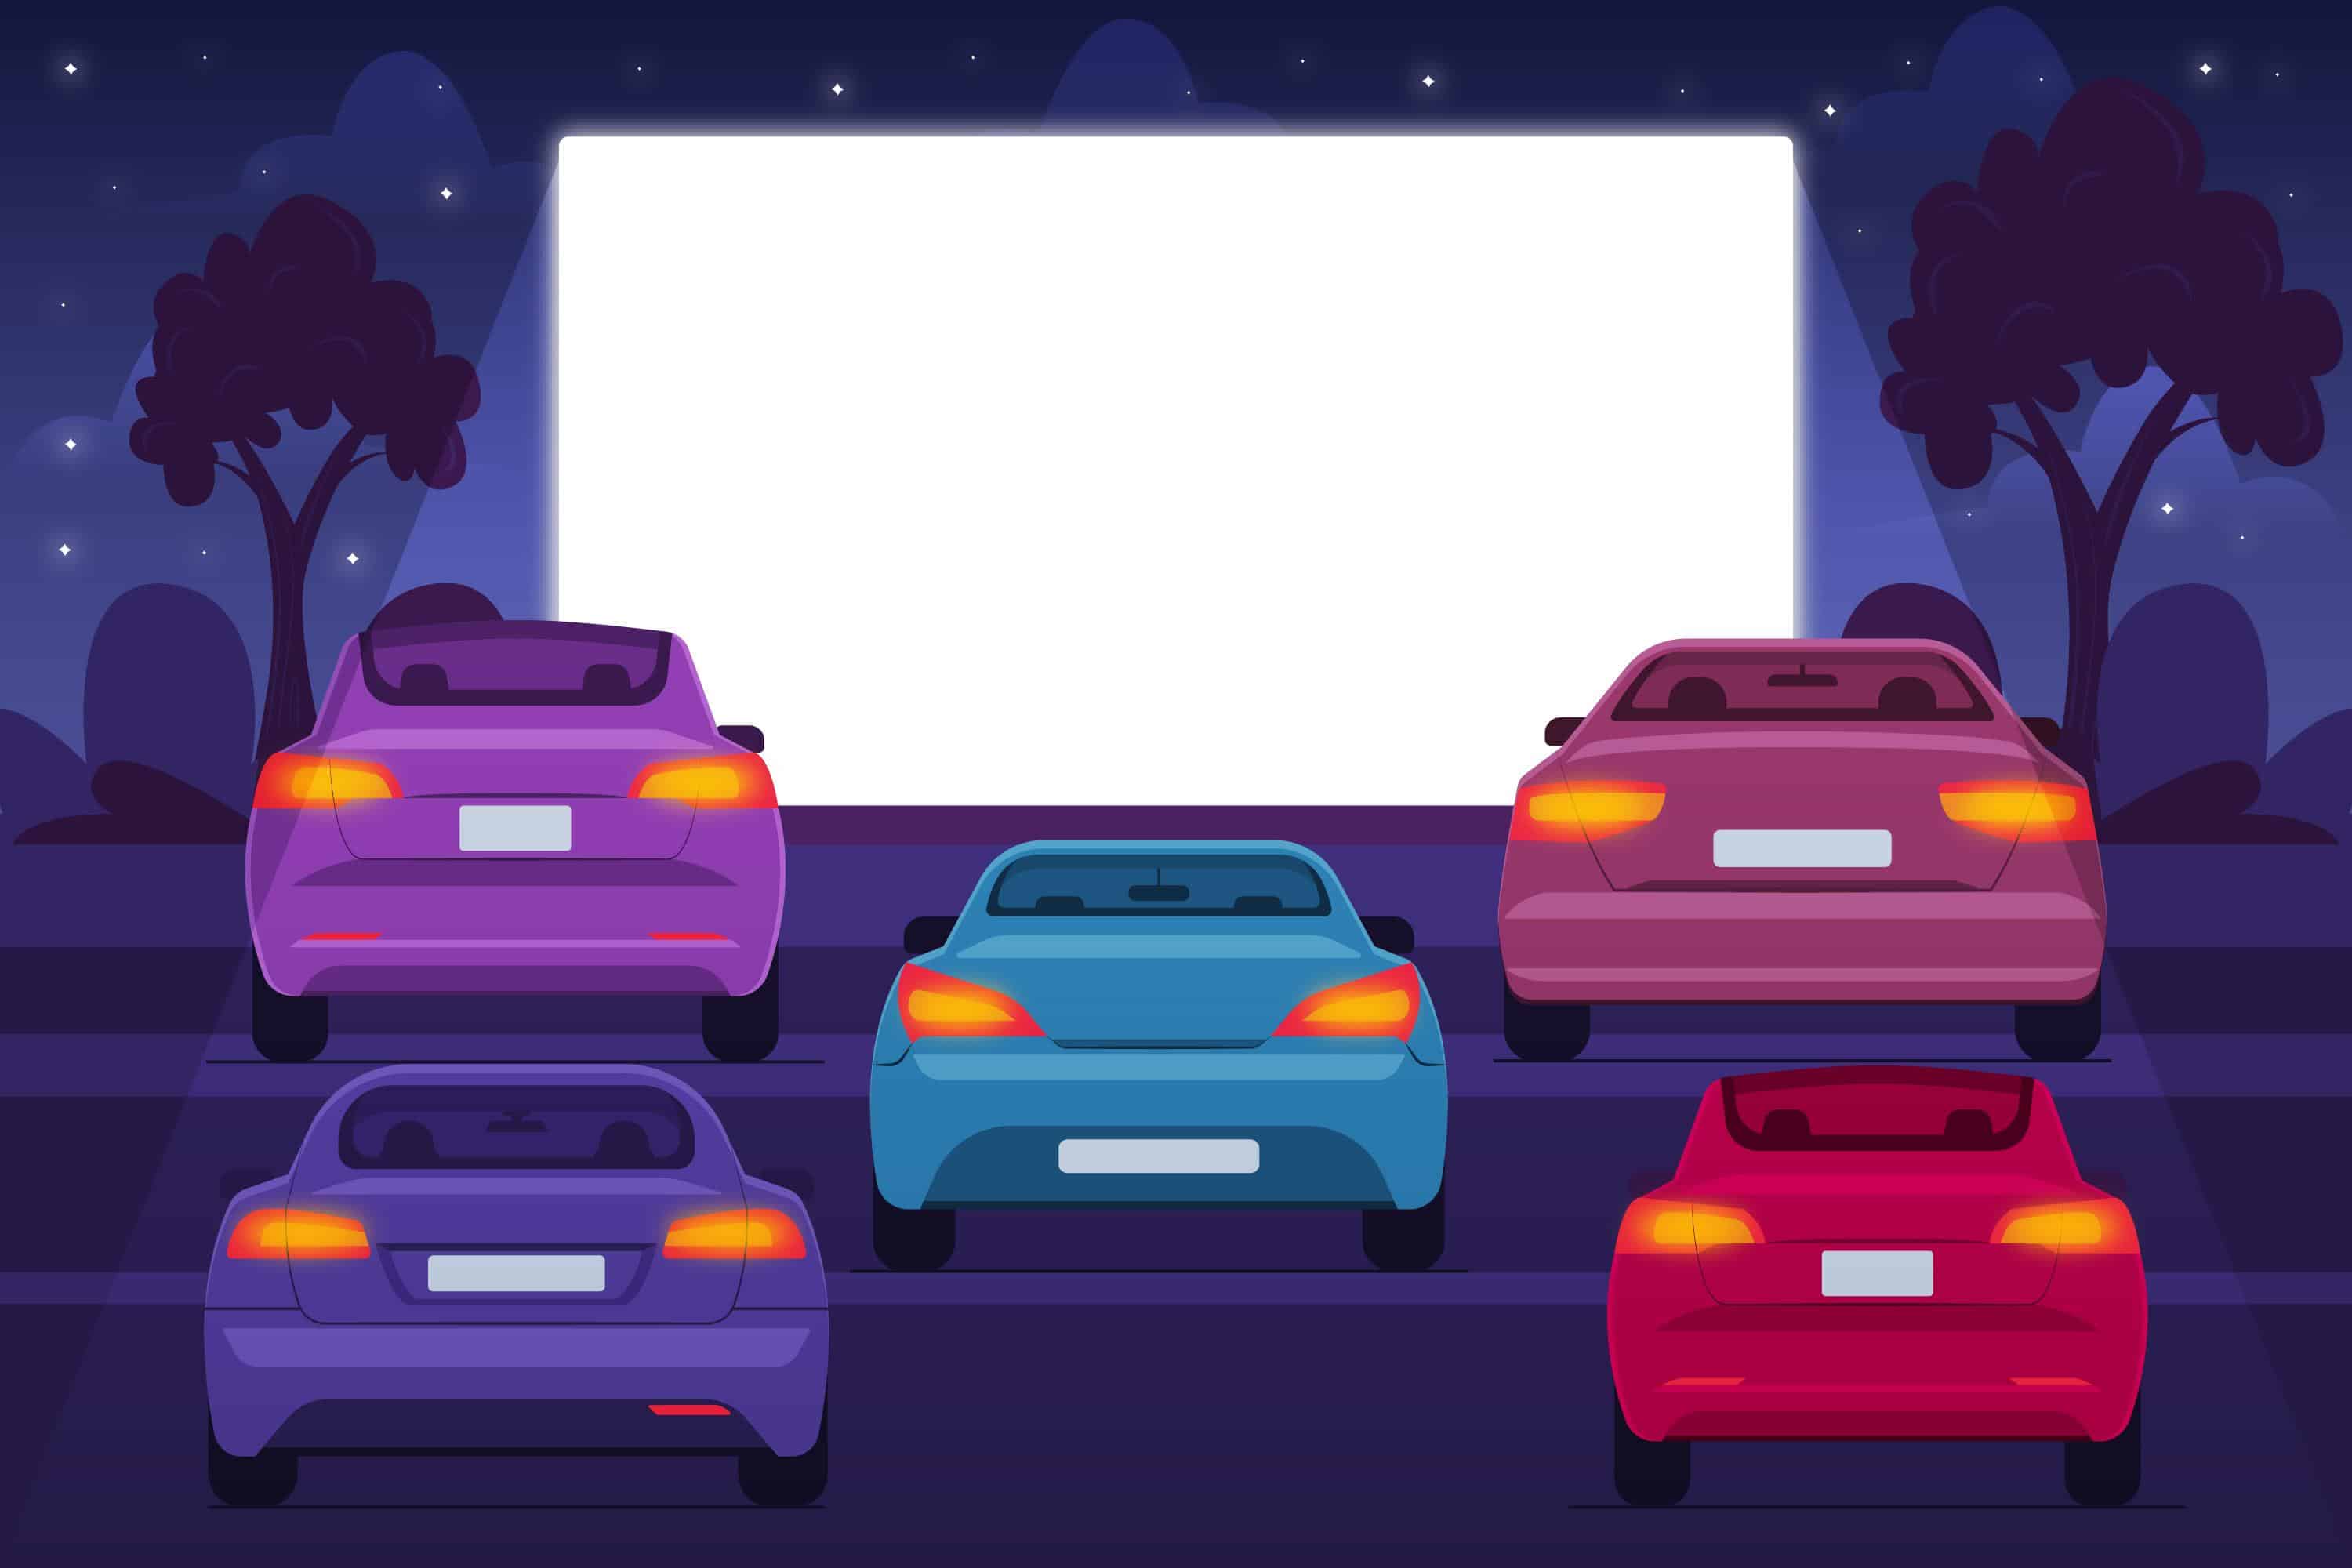 Spinny Celebrates 46% Women Buyers with Exclusive Drive-In Cinema